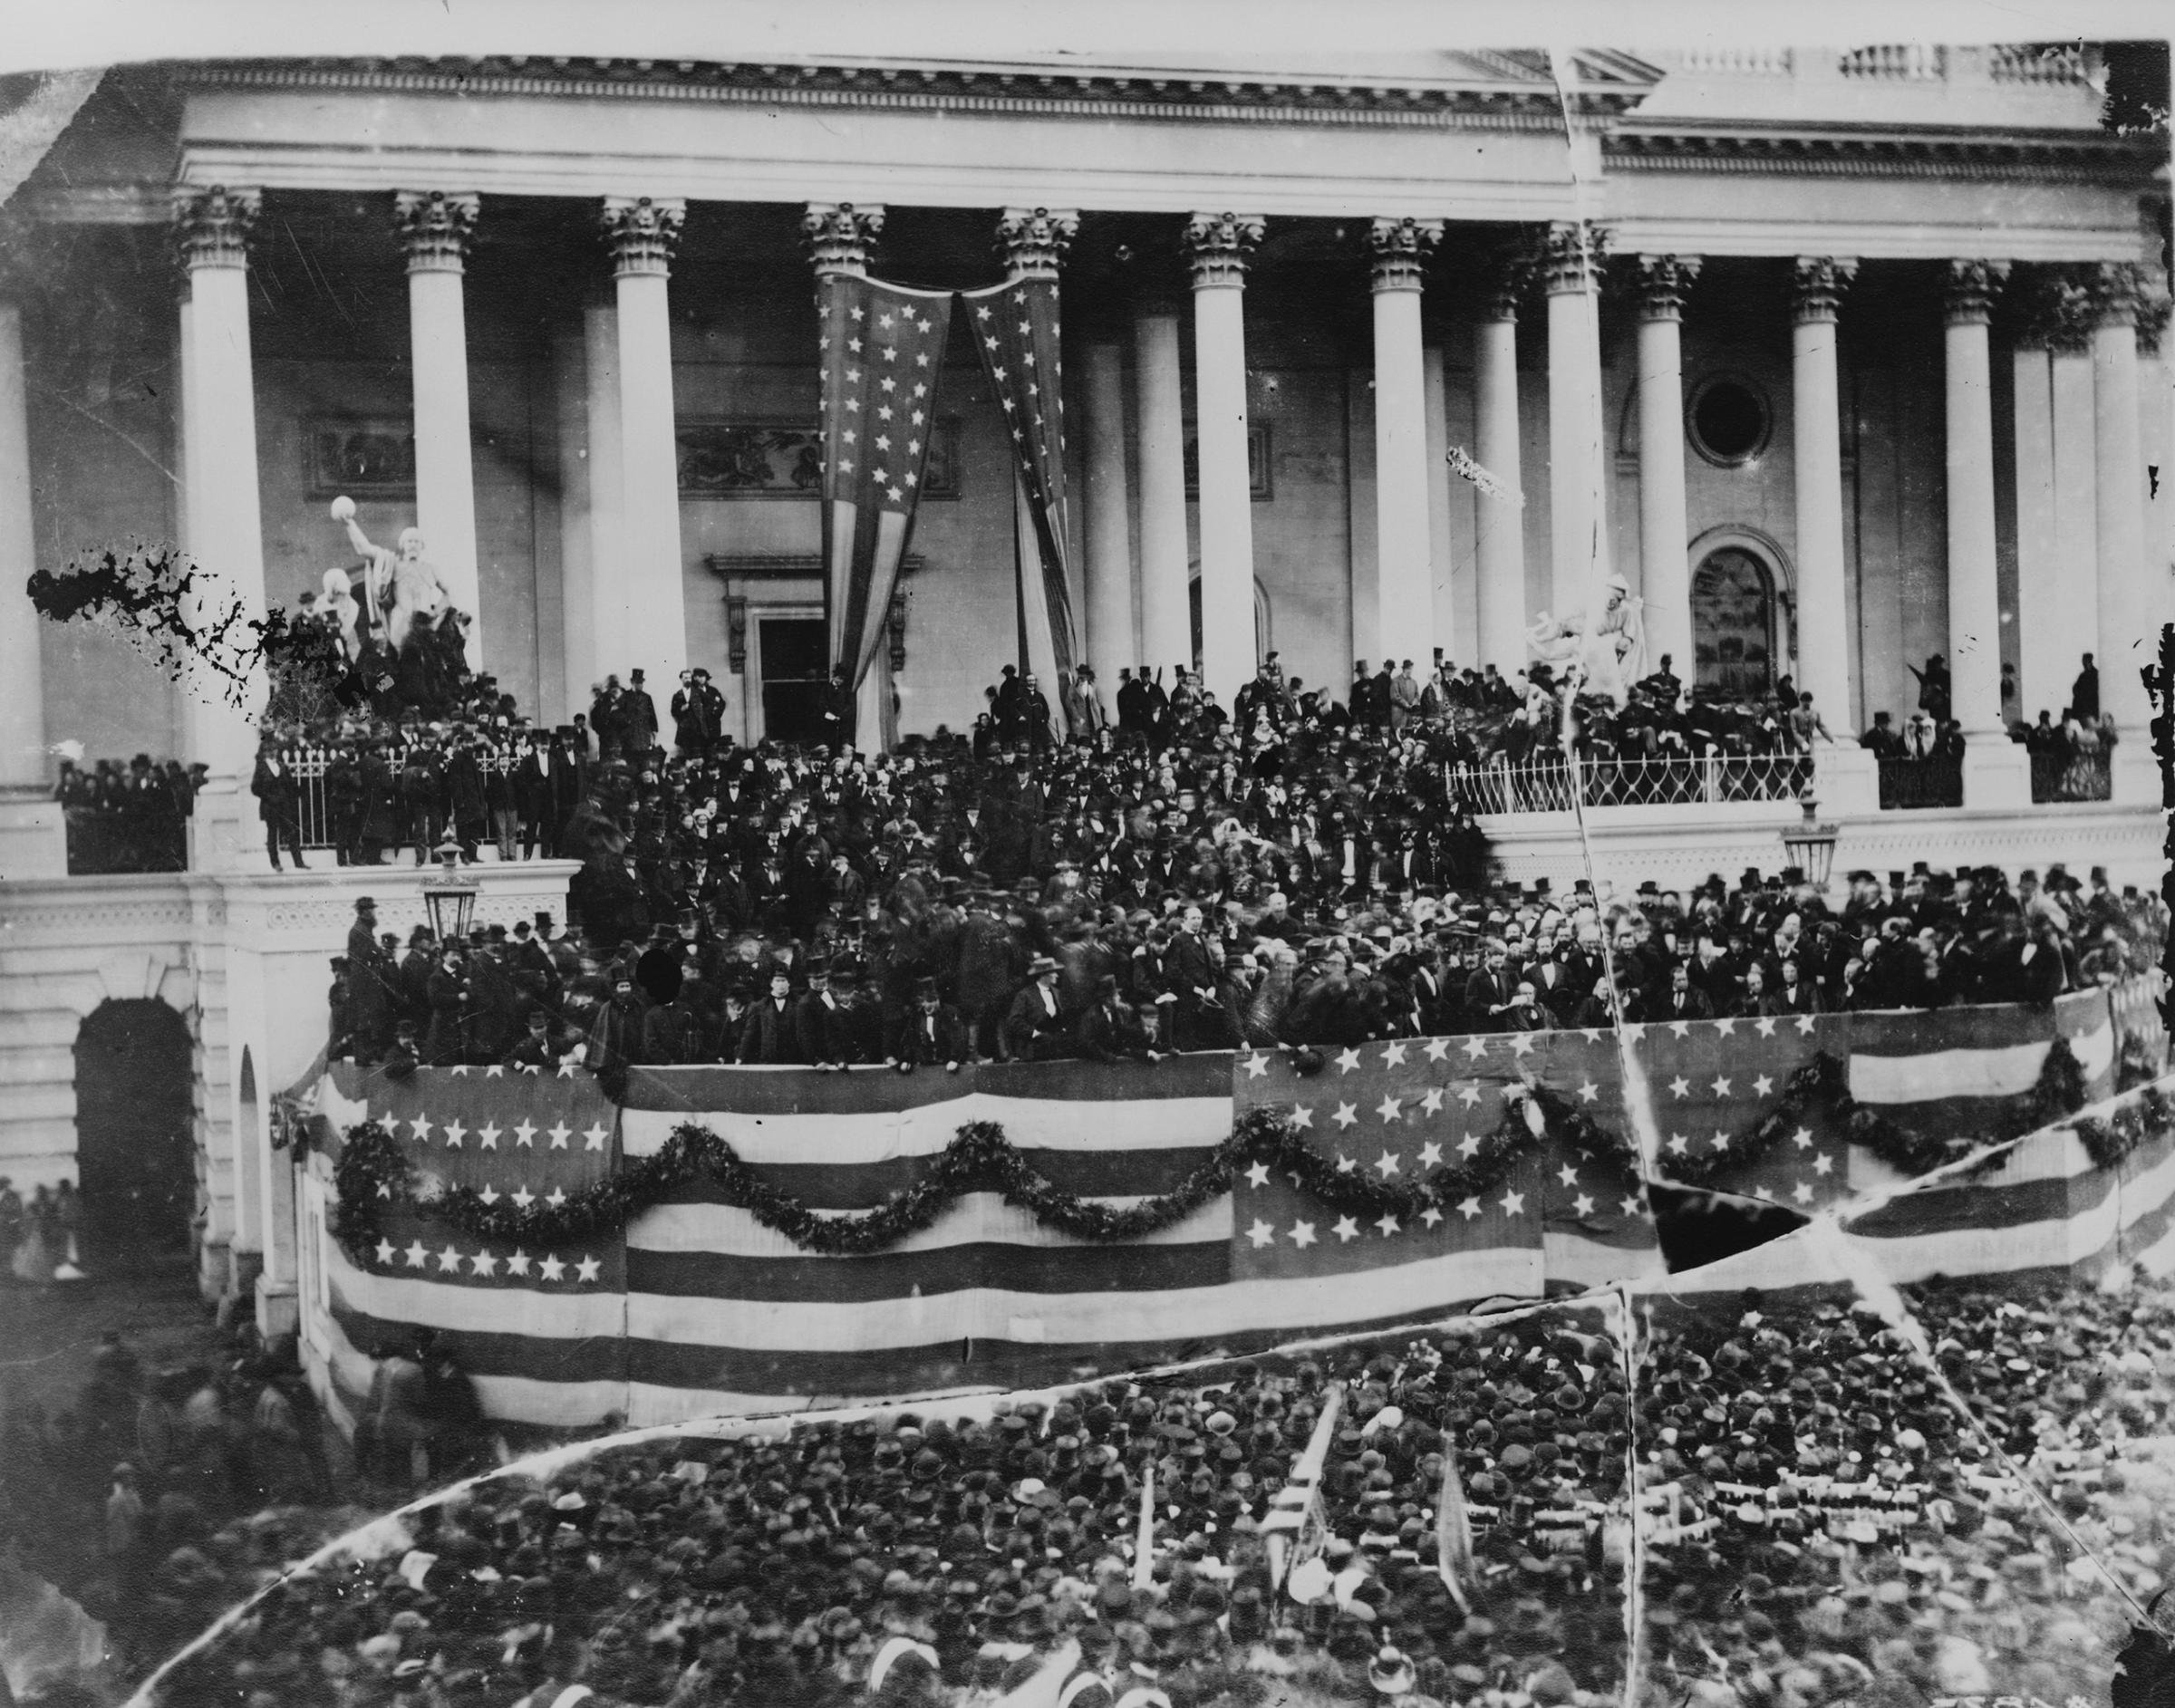 President Ulysses S. Grant delivering his inaugural address on the east portico of the U.S. Capitol, March 4, 1873. Photo by Matthew Brady.